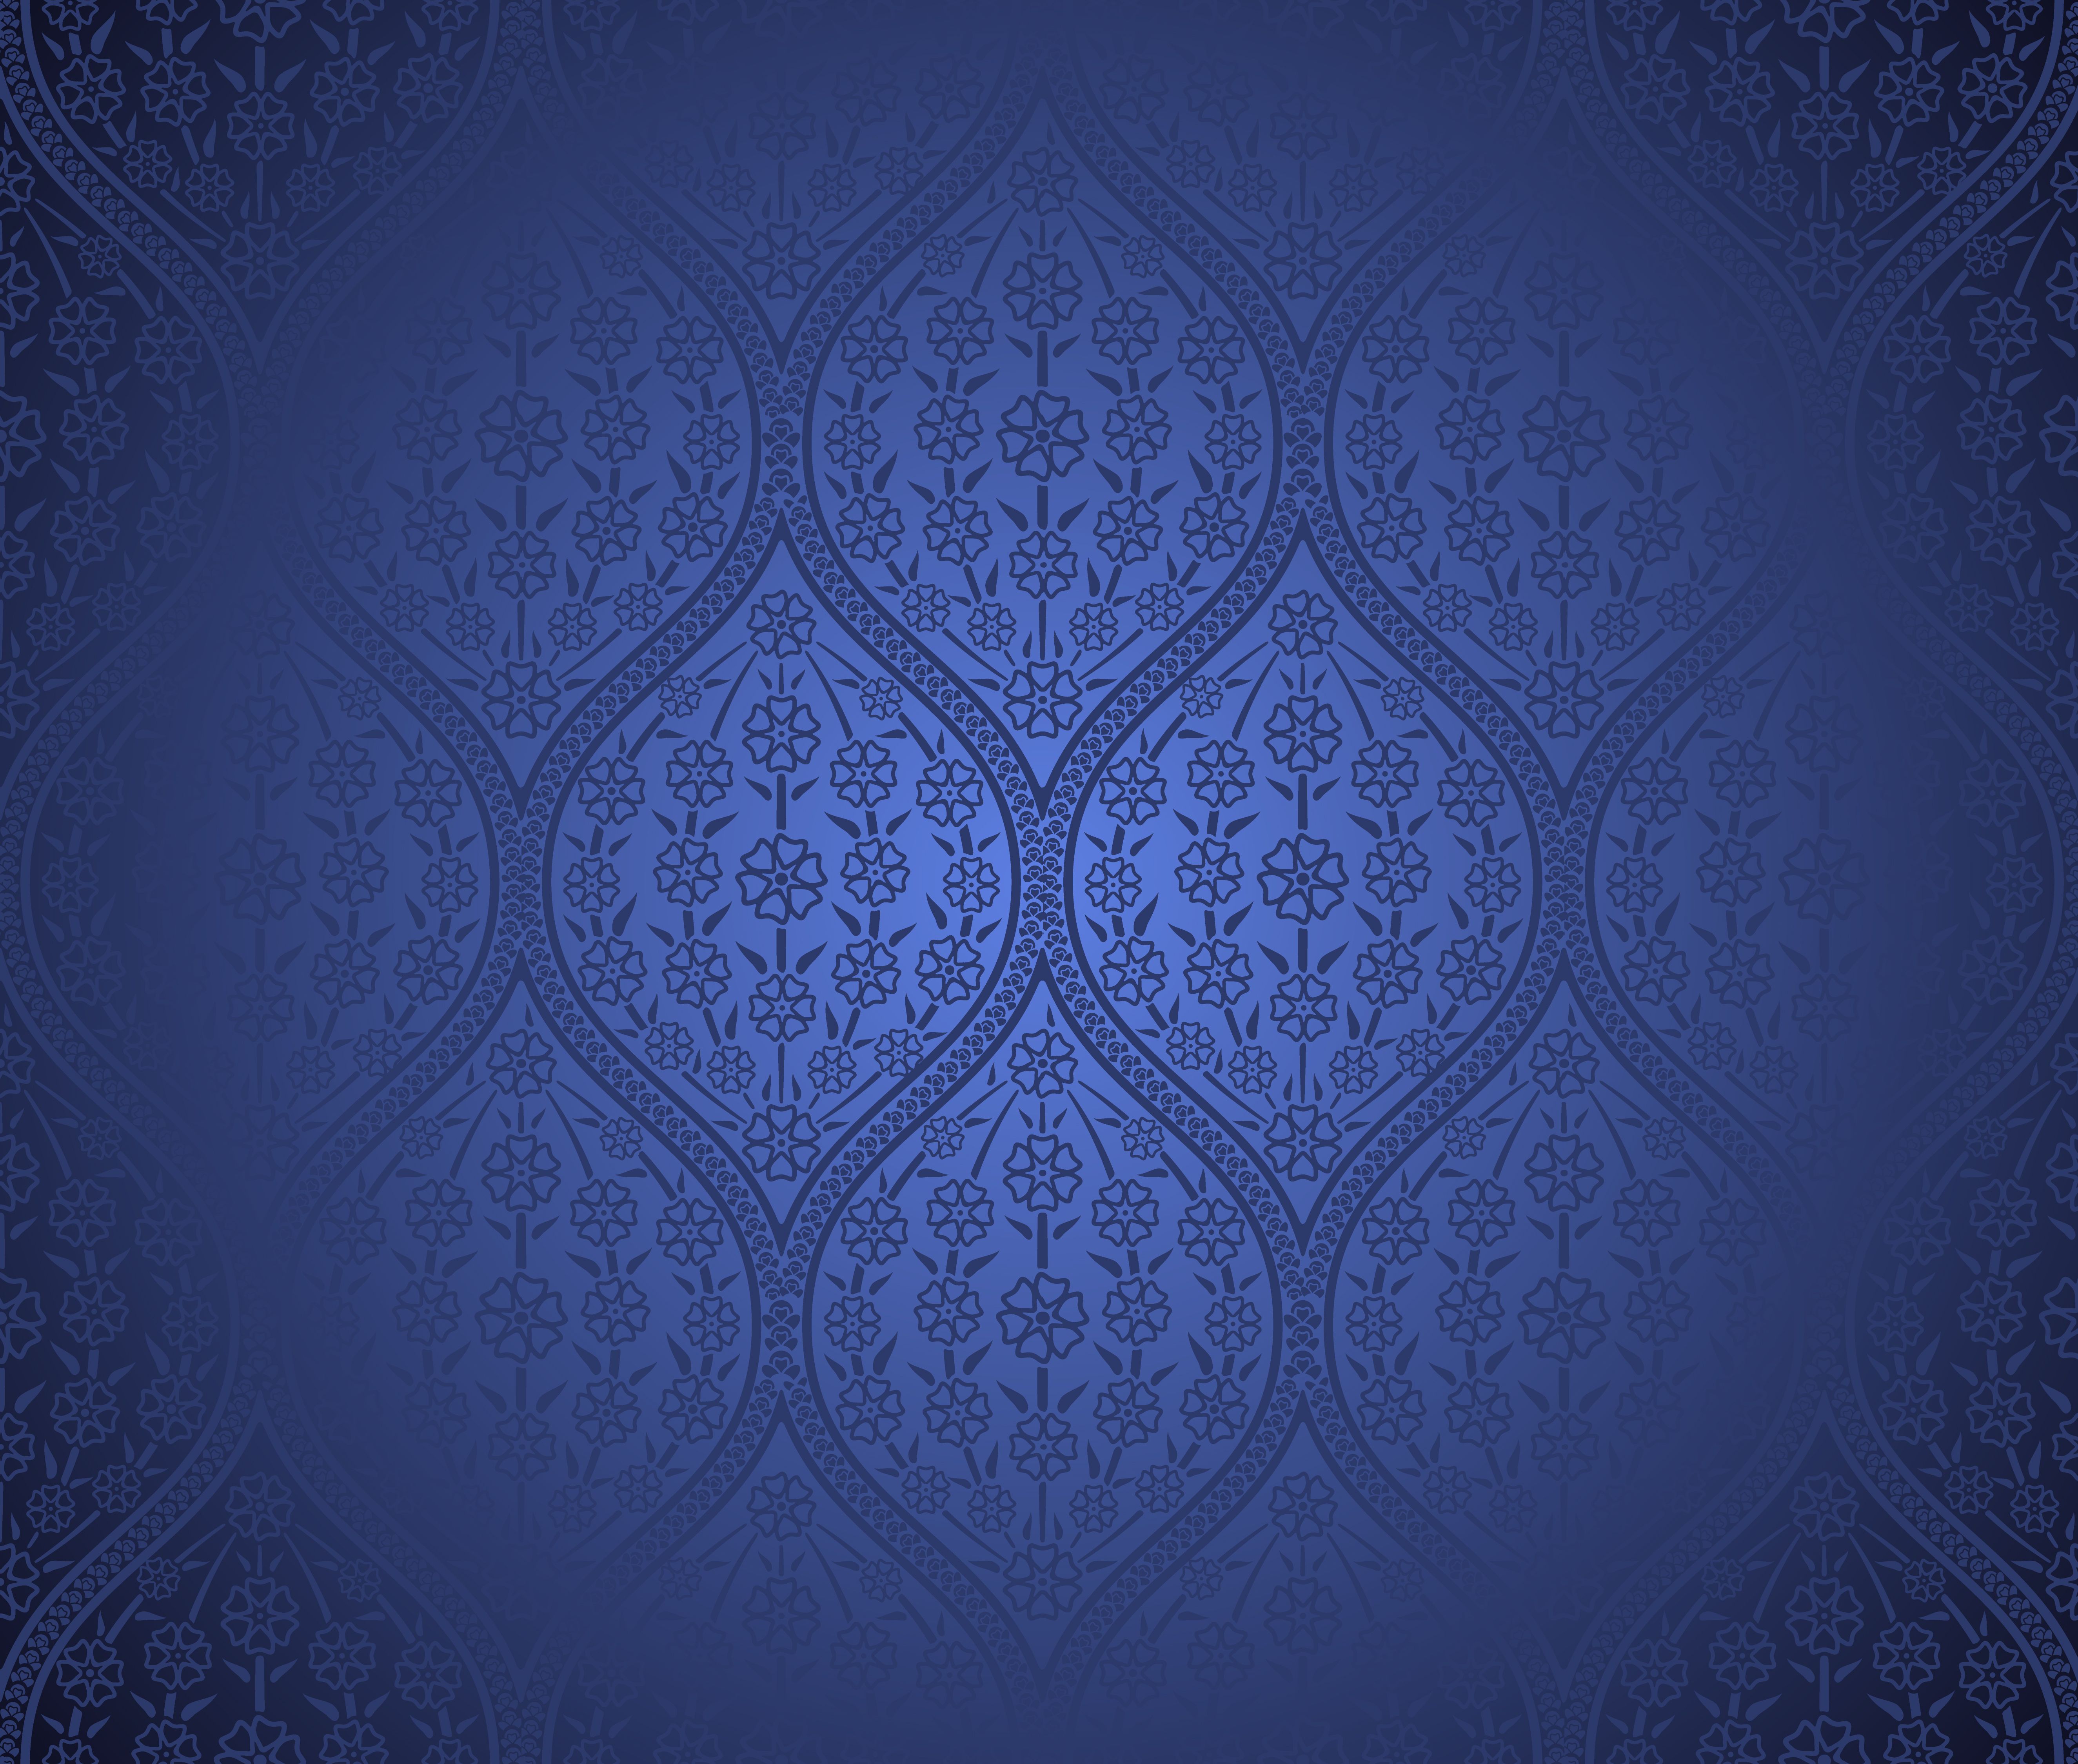 Moroccan Pattern Wallpapers - 4k, HD Moroccan Pattern Backgrounds on ...